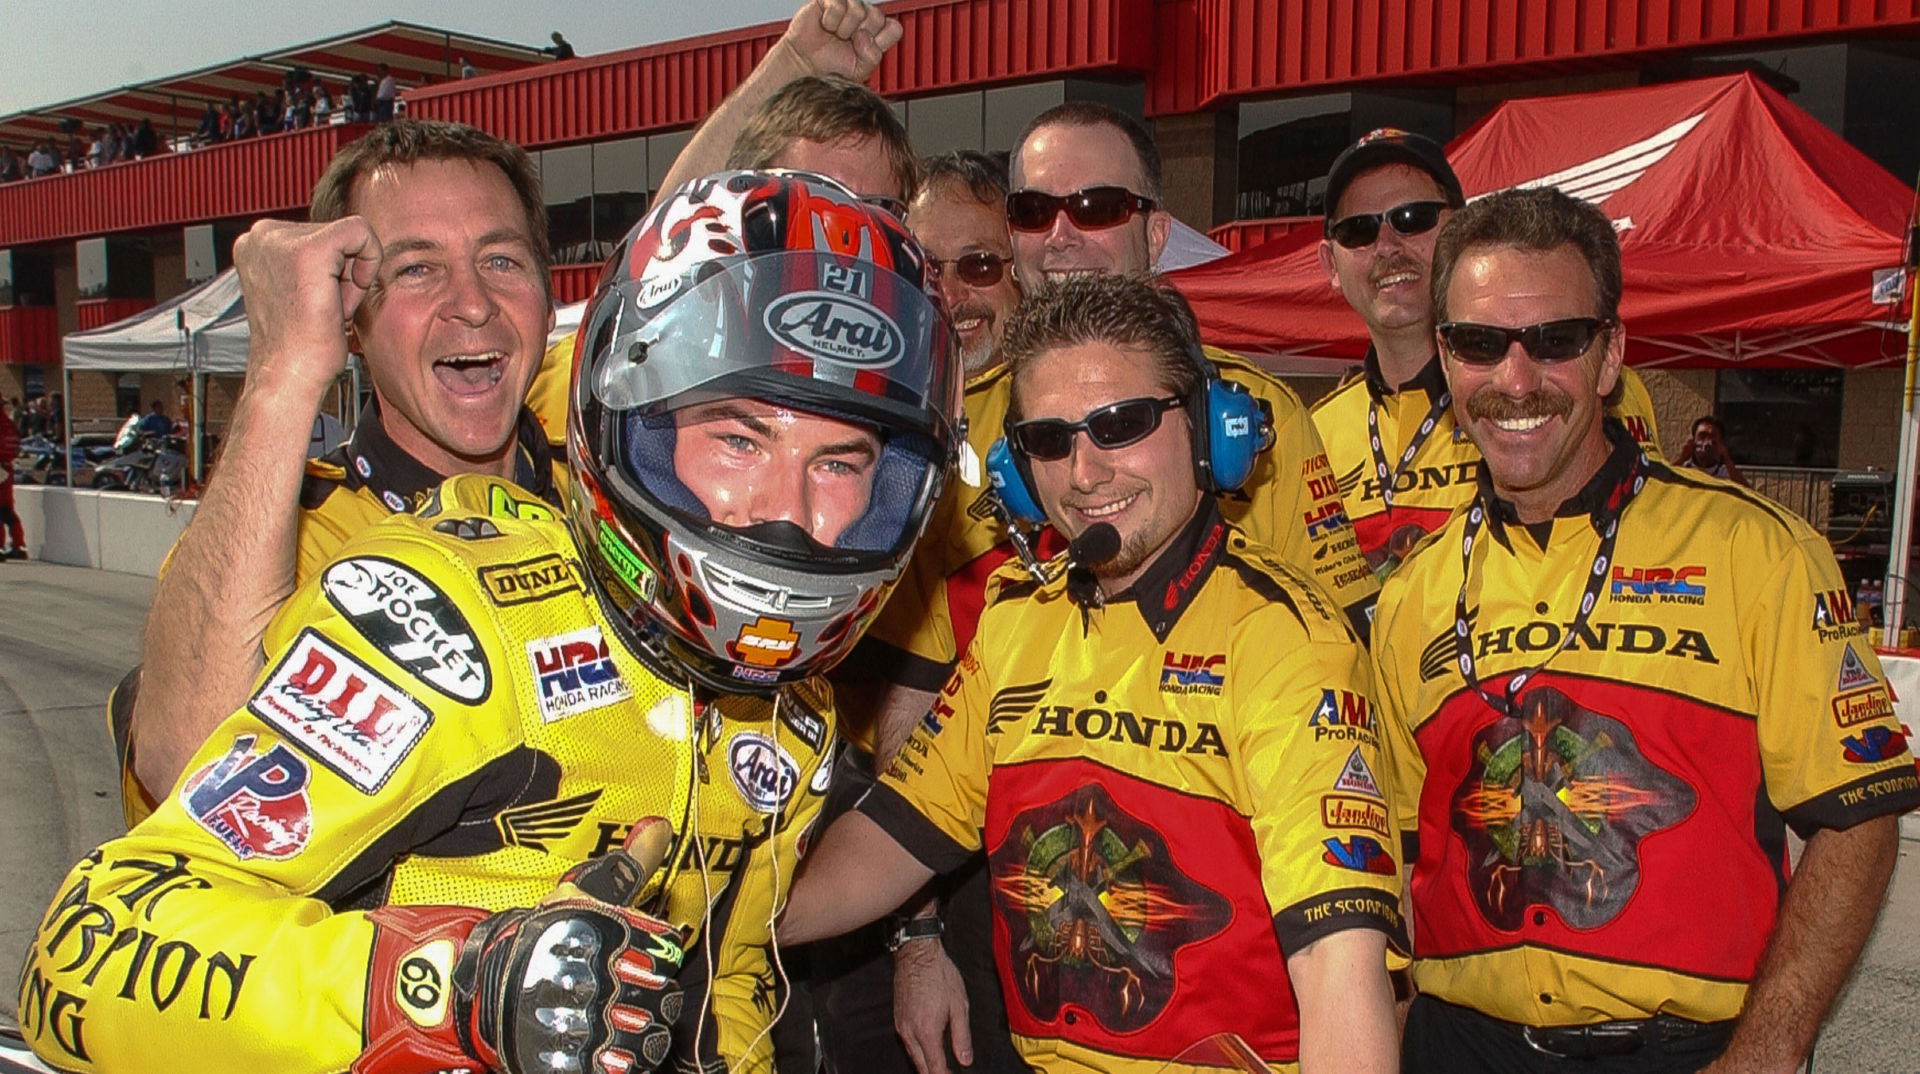 Chuck Miller (far right) with the late Nicky Hayden and his crew after winning an AMA Pro Superbike race at Auto Club Speedway in 2002. Pictured from left is: Mark Braunwalder, Dan Fahie (behind Hayden), the late Merlyn Plumlee, Davey Jones, Darin Marshall, and Ray Plumb. Photo by Brian J. Nelson.